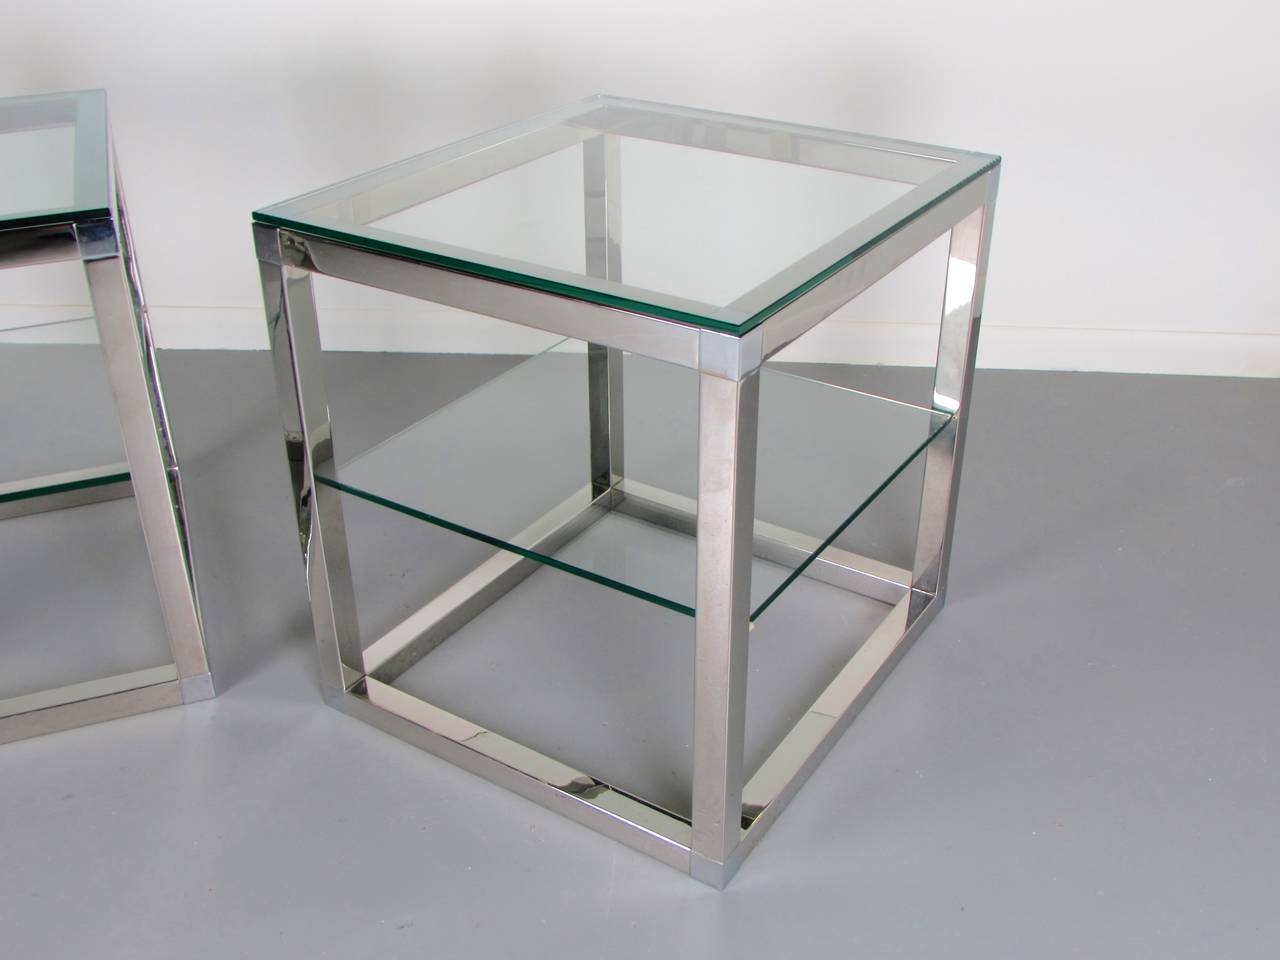 Mid-Century Modern Minimalist Chrome Cube Tables with Glass Shelves in the Style of Milo Baughman